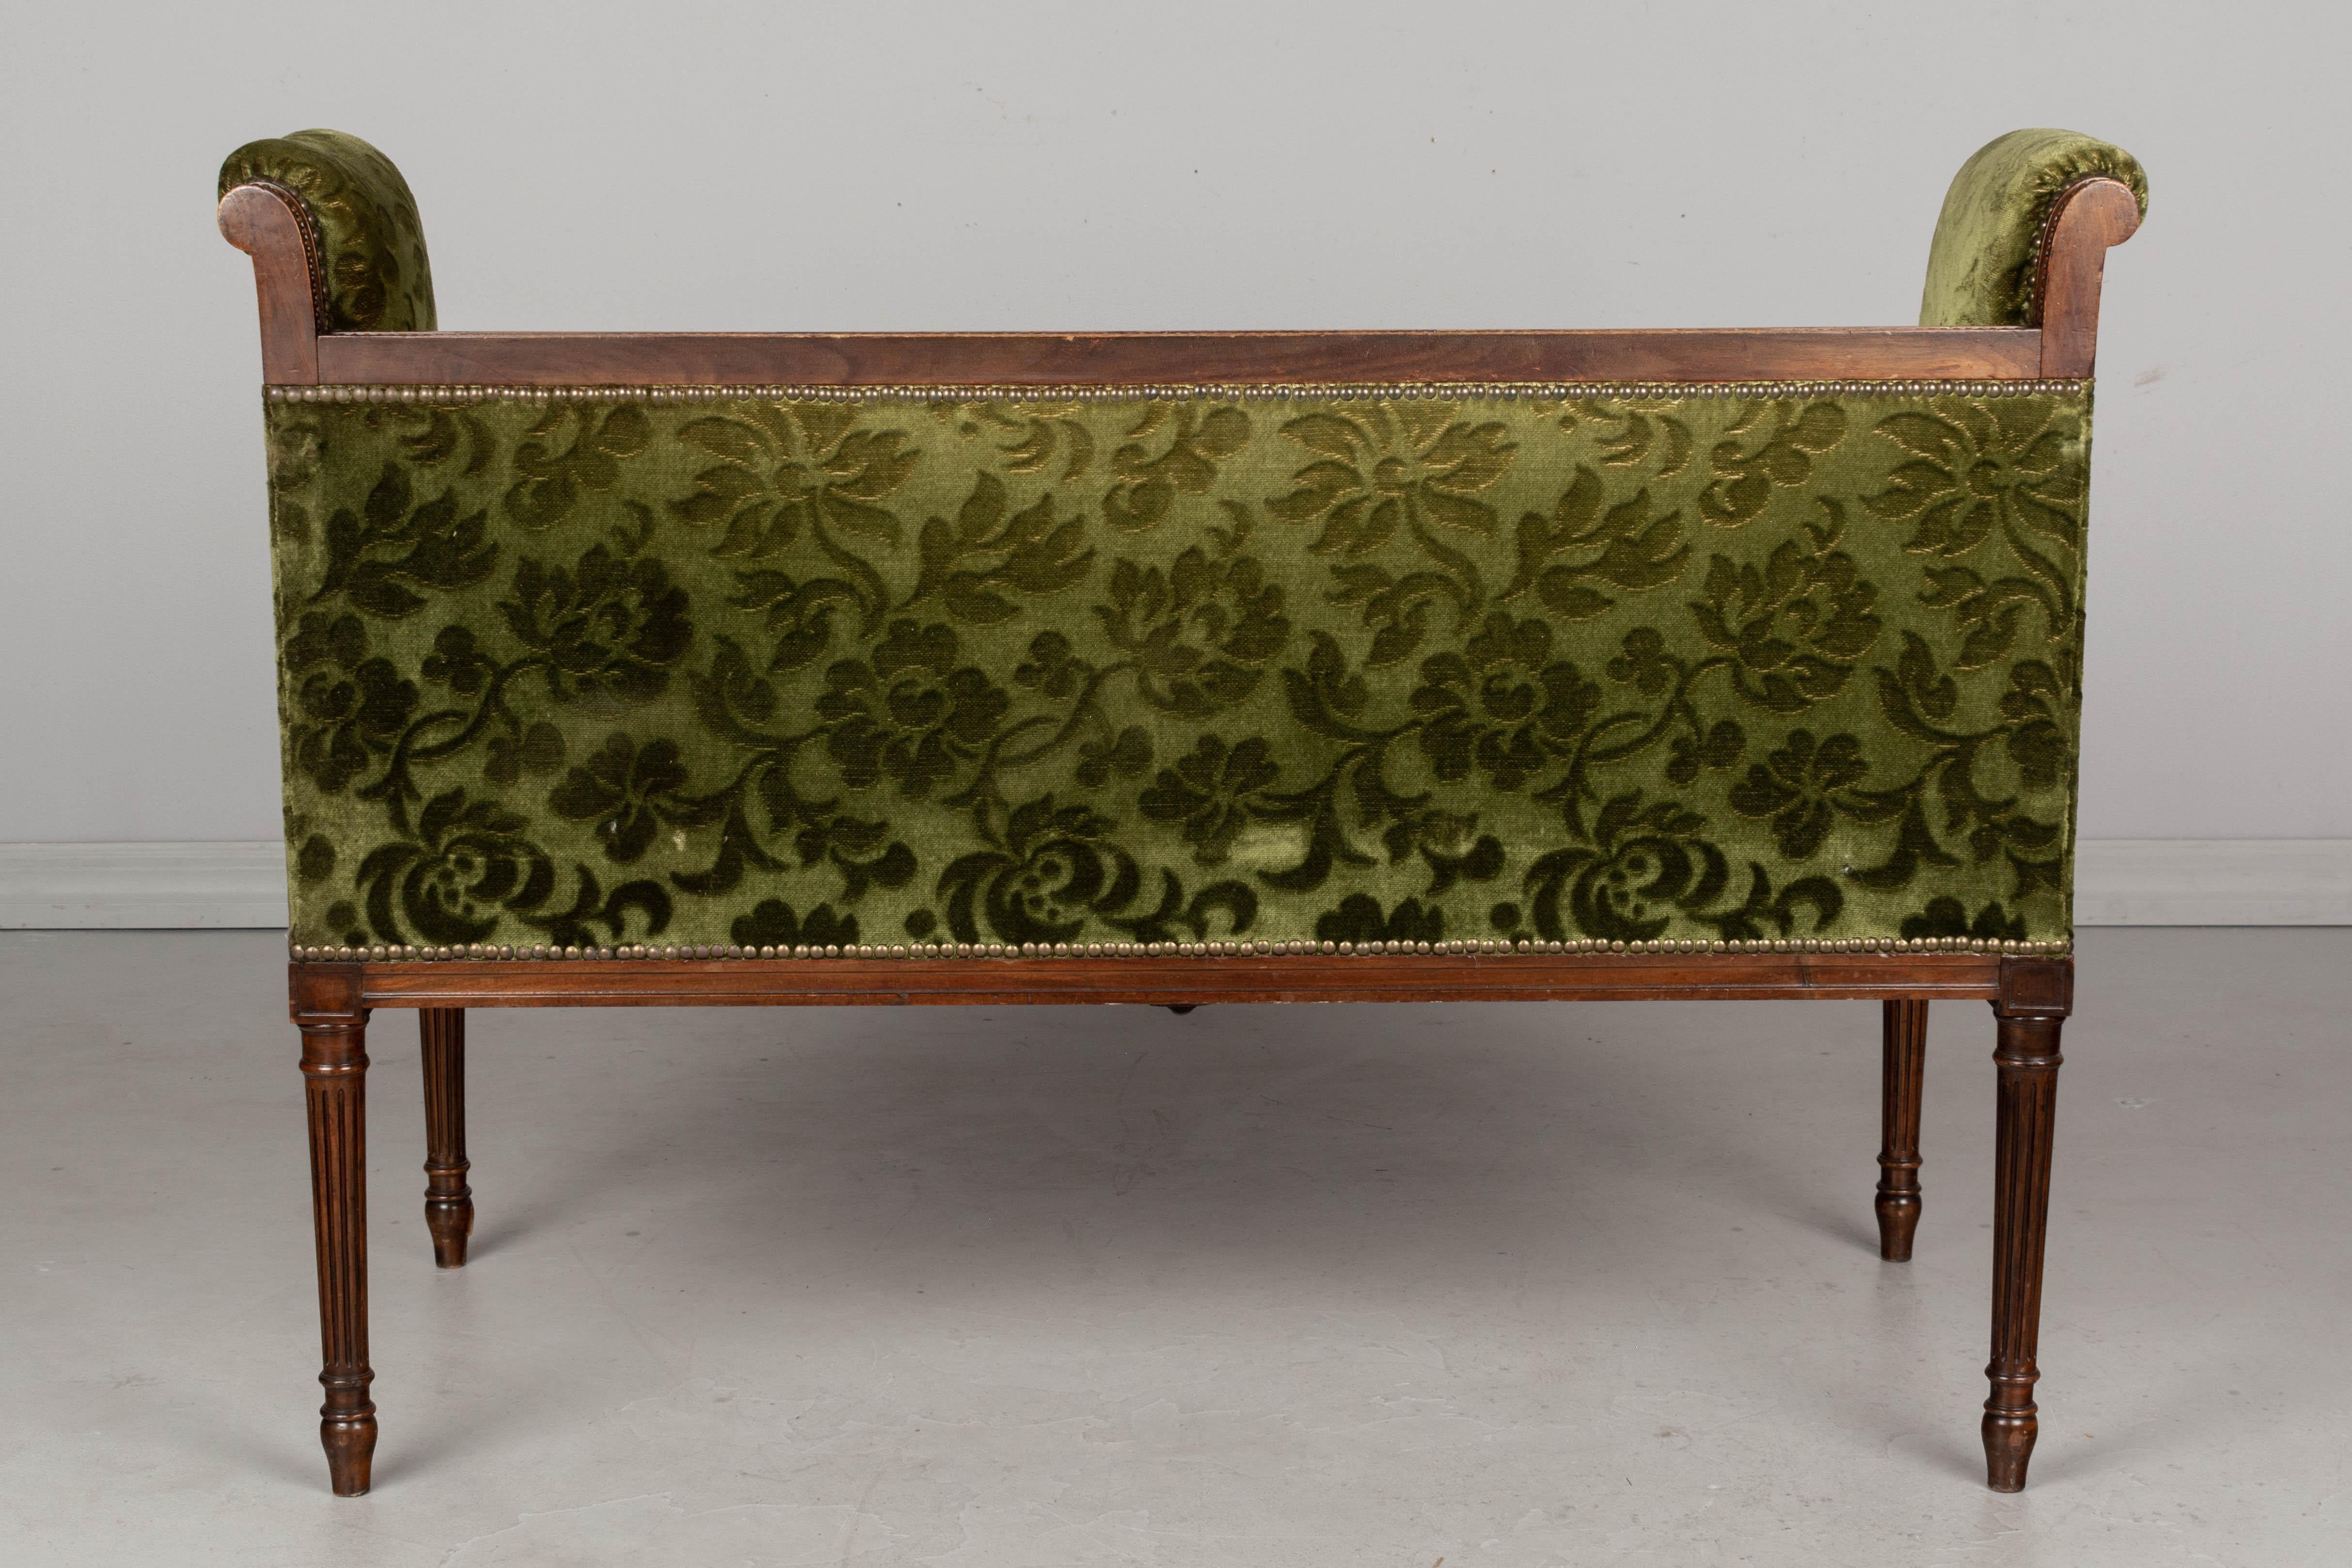 Hand-Crafted French Louis XVI Style Banquette or Bench